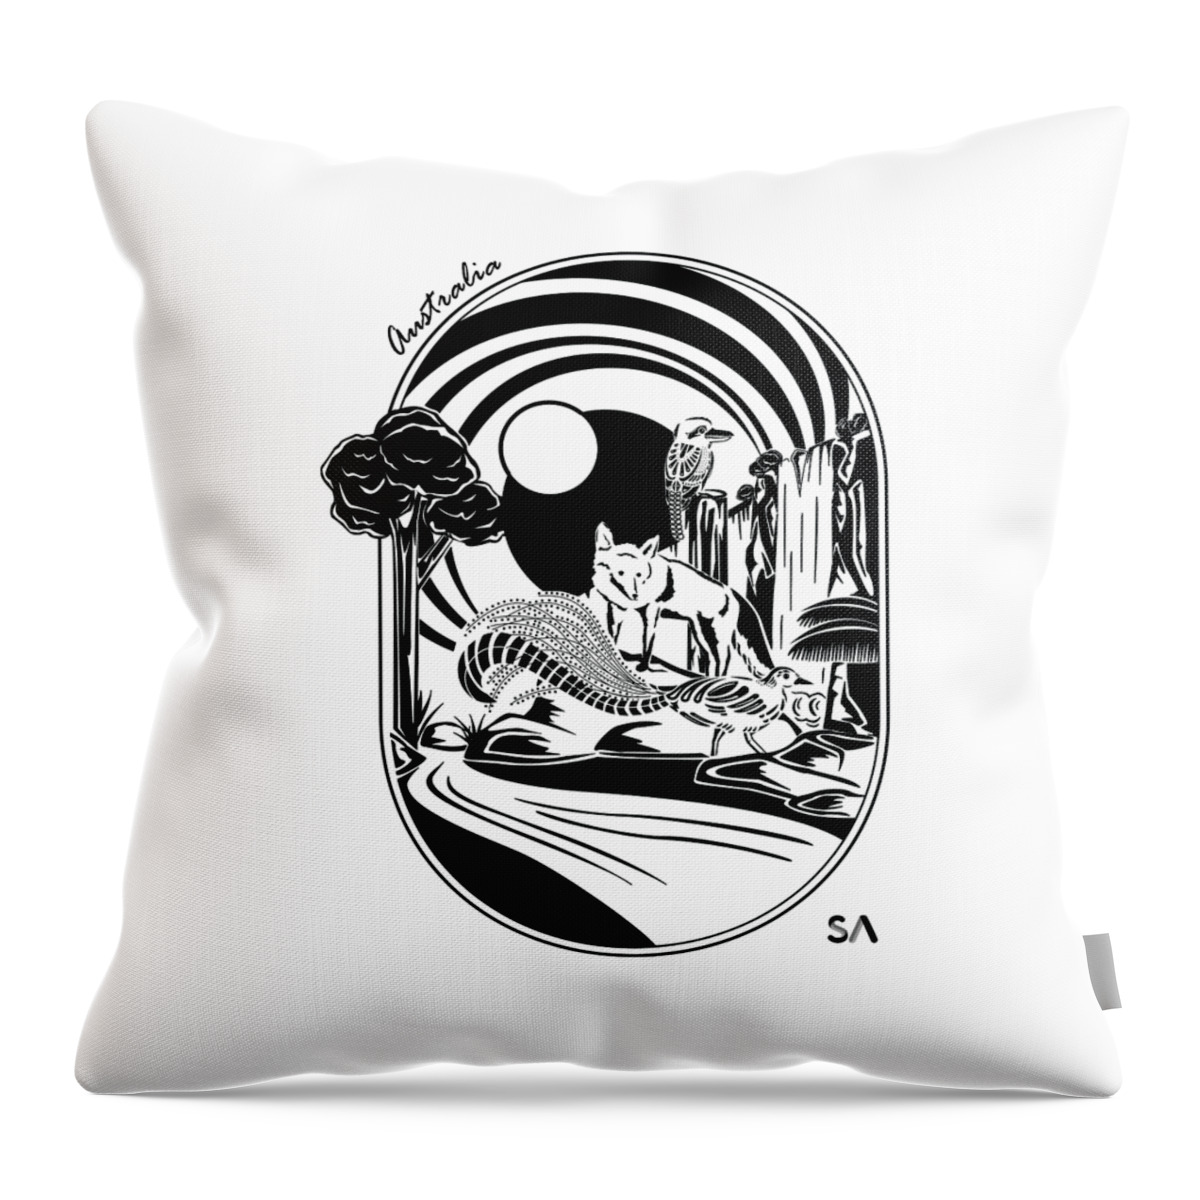 Black And White Throw Pillow featuring the digital art Australia by Silvio Ary Cavalcante